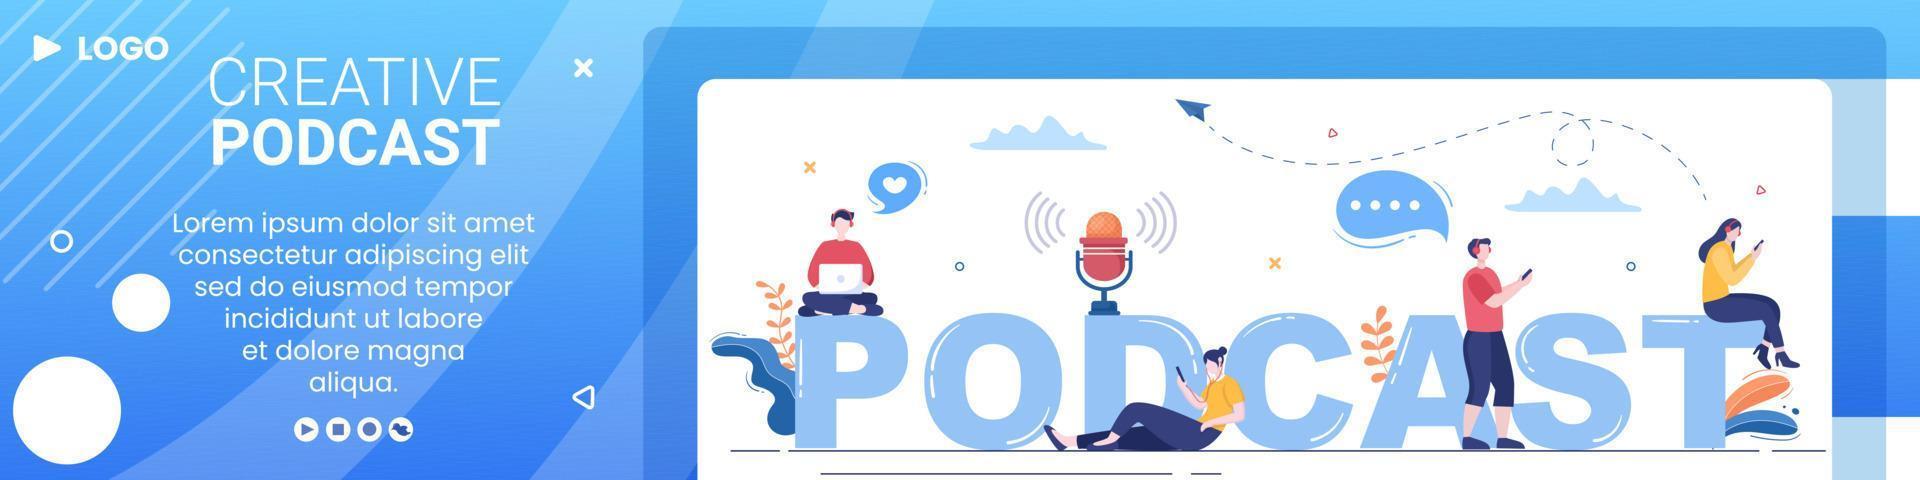 People Using Headset to Podcast Banner Template Flat Design Illustration Editable of Square Background for Social Media or Greeting Card vector